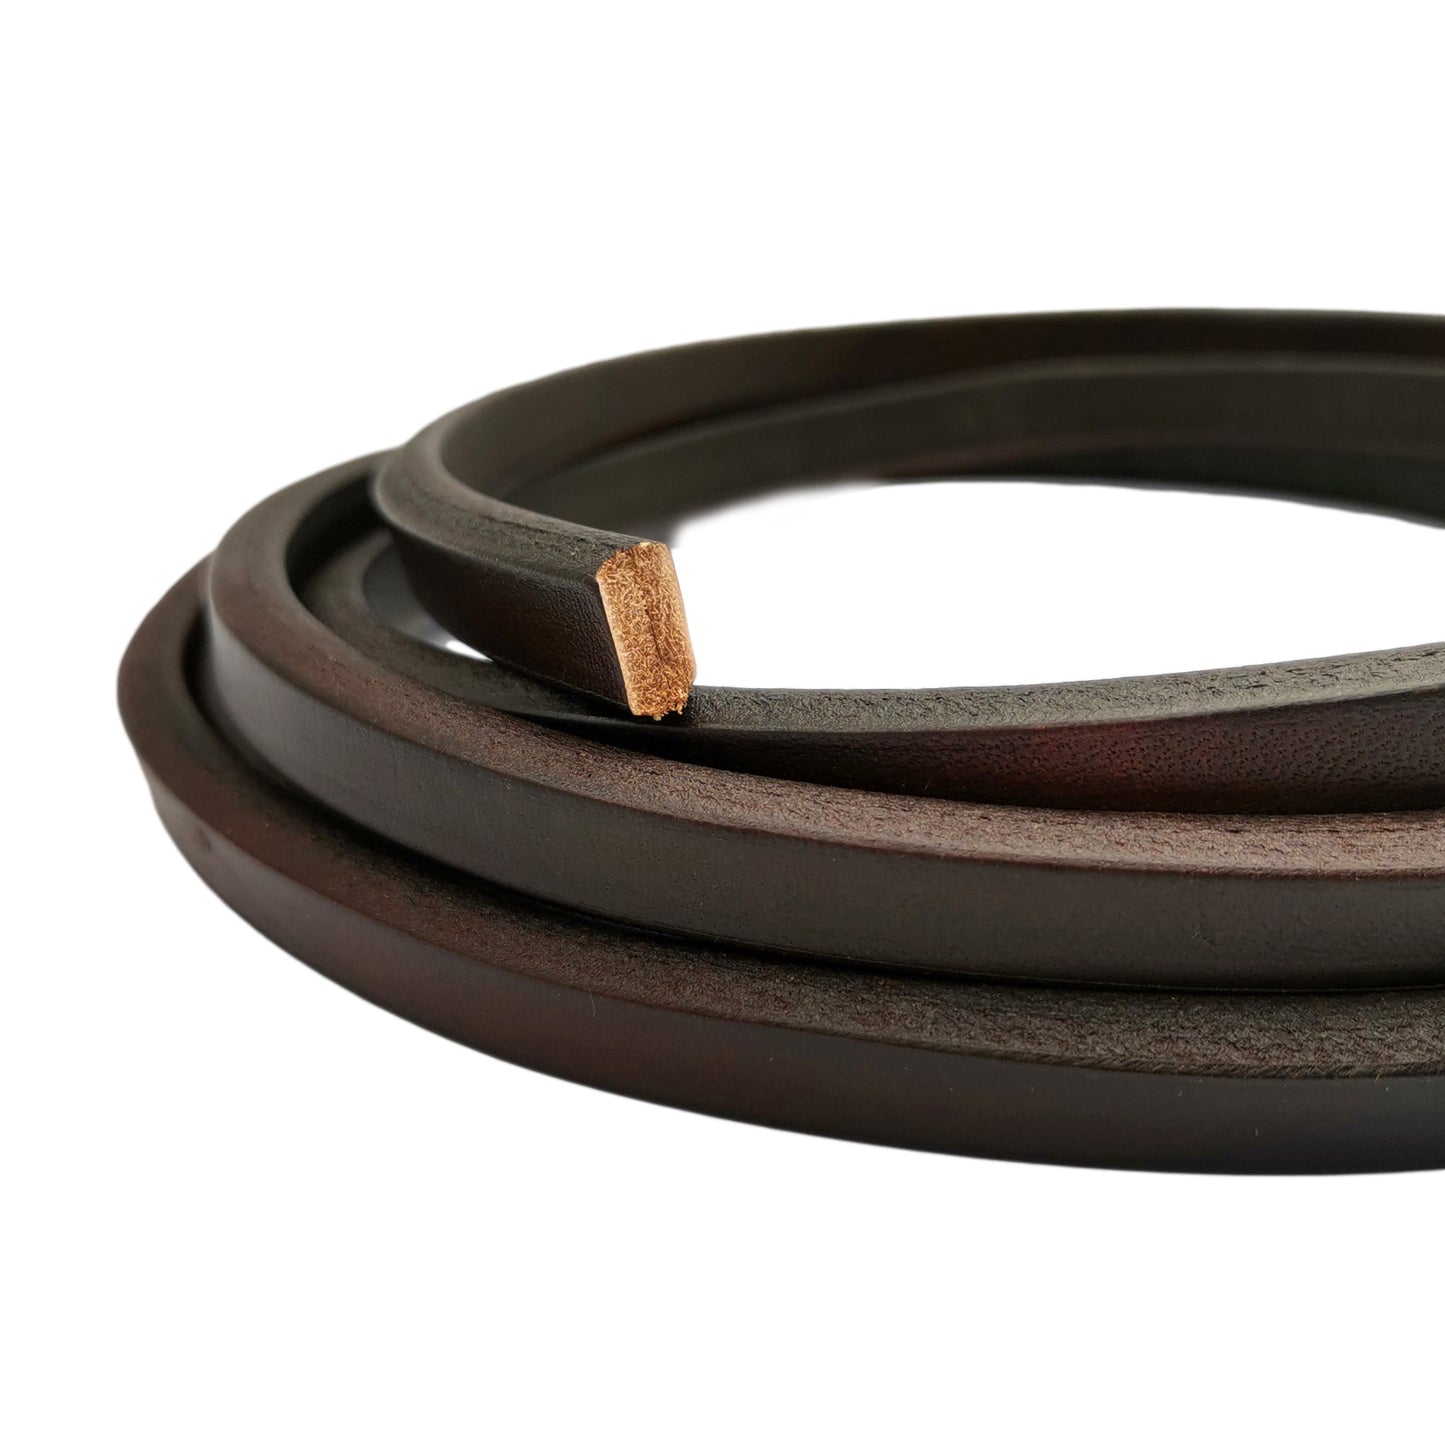 shapesbyX-1 Yard Licorice Leather Cords 10mmx6mm Leather Bangle Bracelet Making 10x6mm Distressed Brown